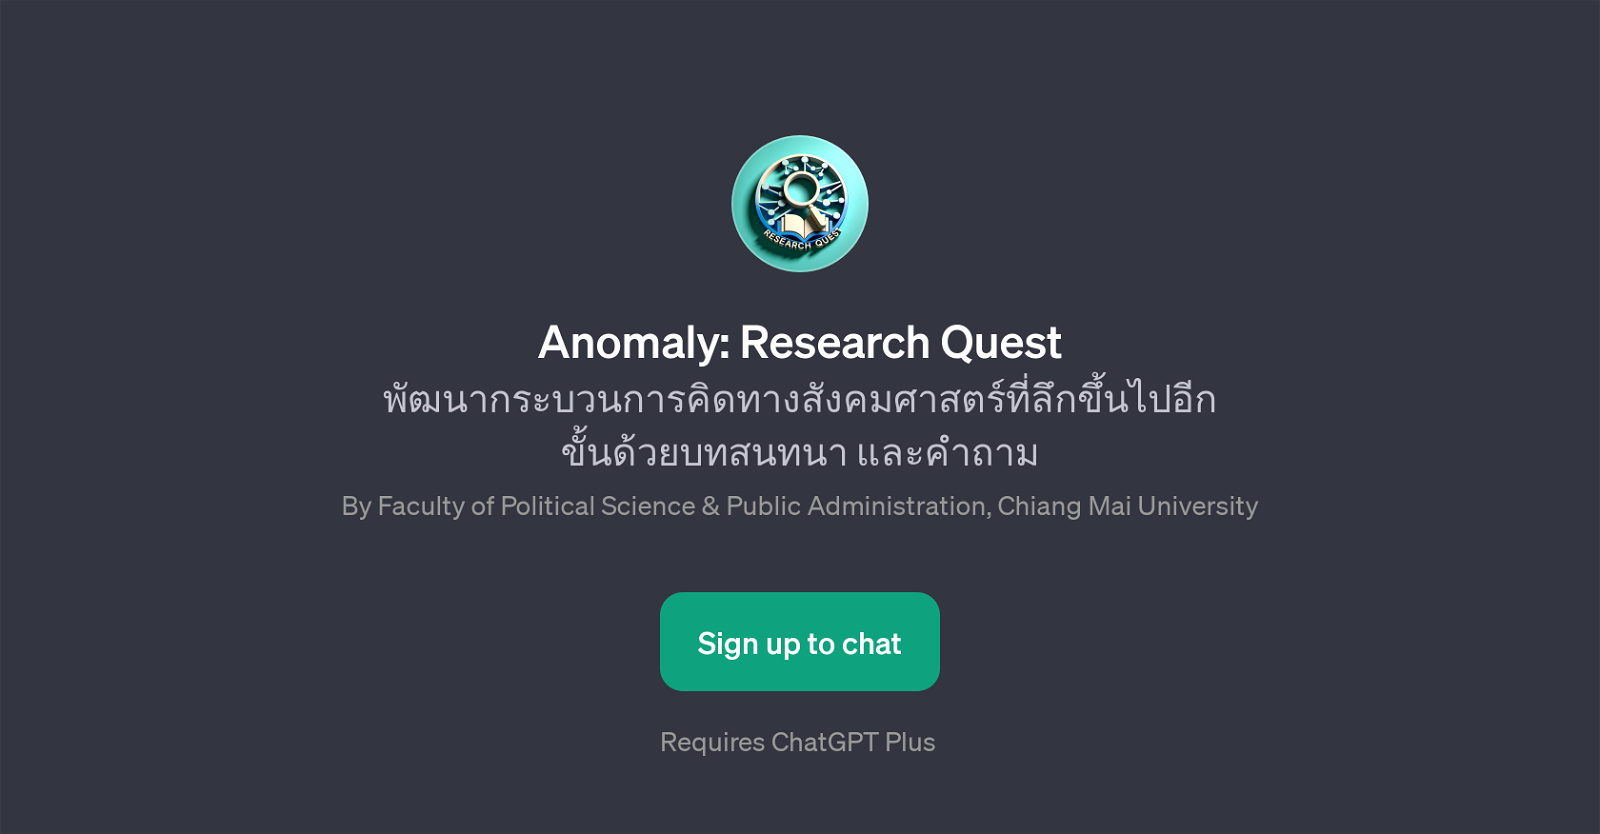 Anomaly: Research Quest website